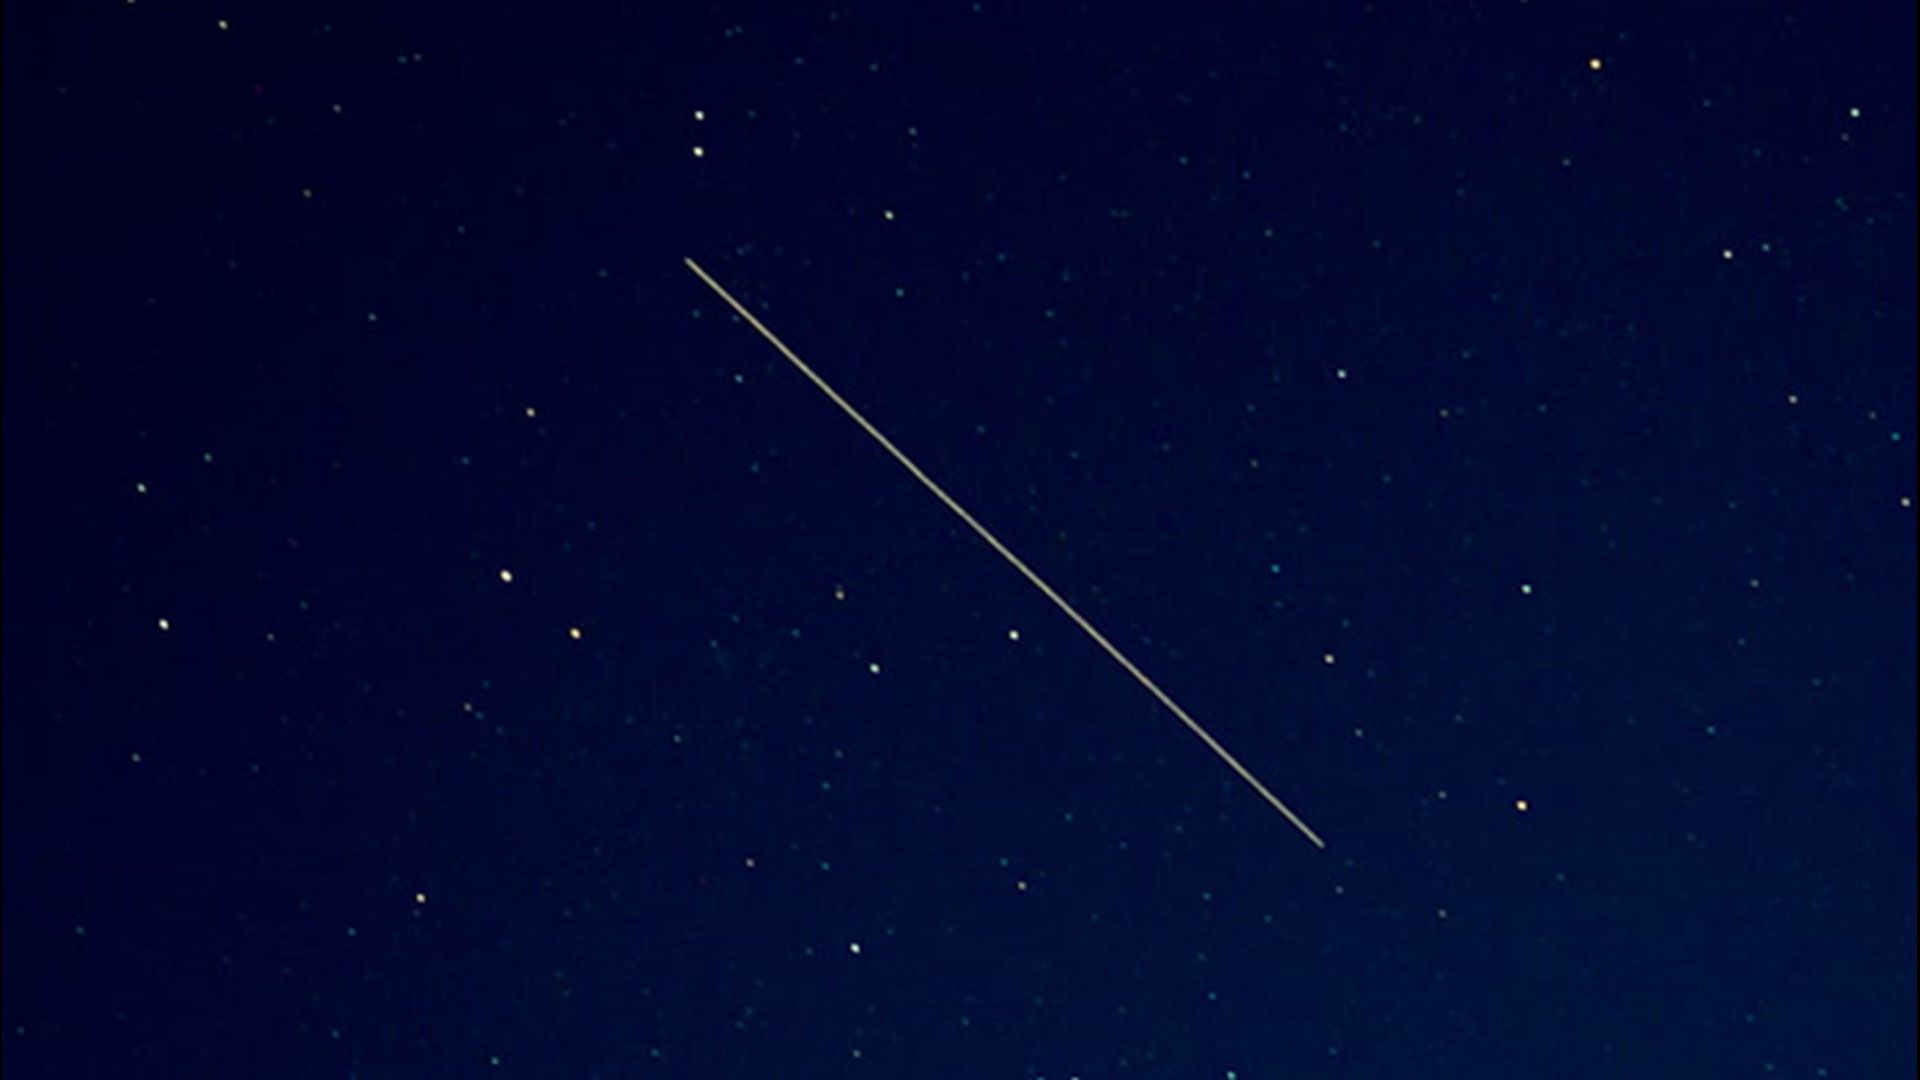 After a four-month hiatus, shooting stars will return with the peak of the Lyrid meteor shower on April 21-22 as the world celebrates Earth Day.